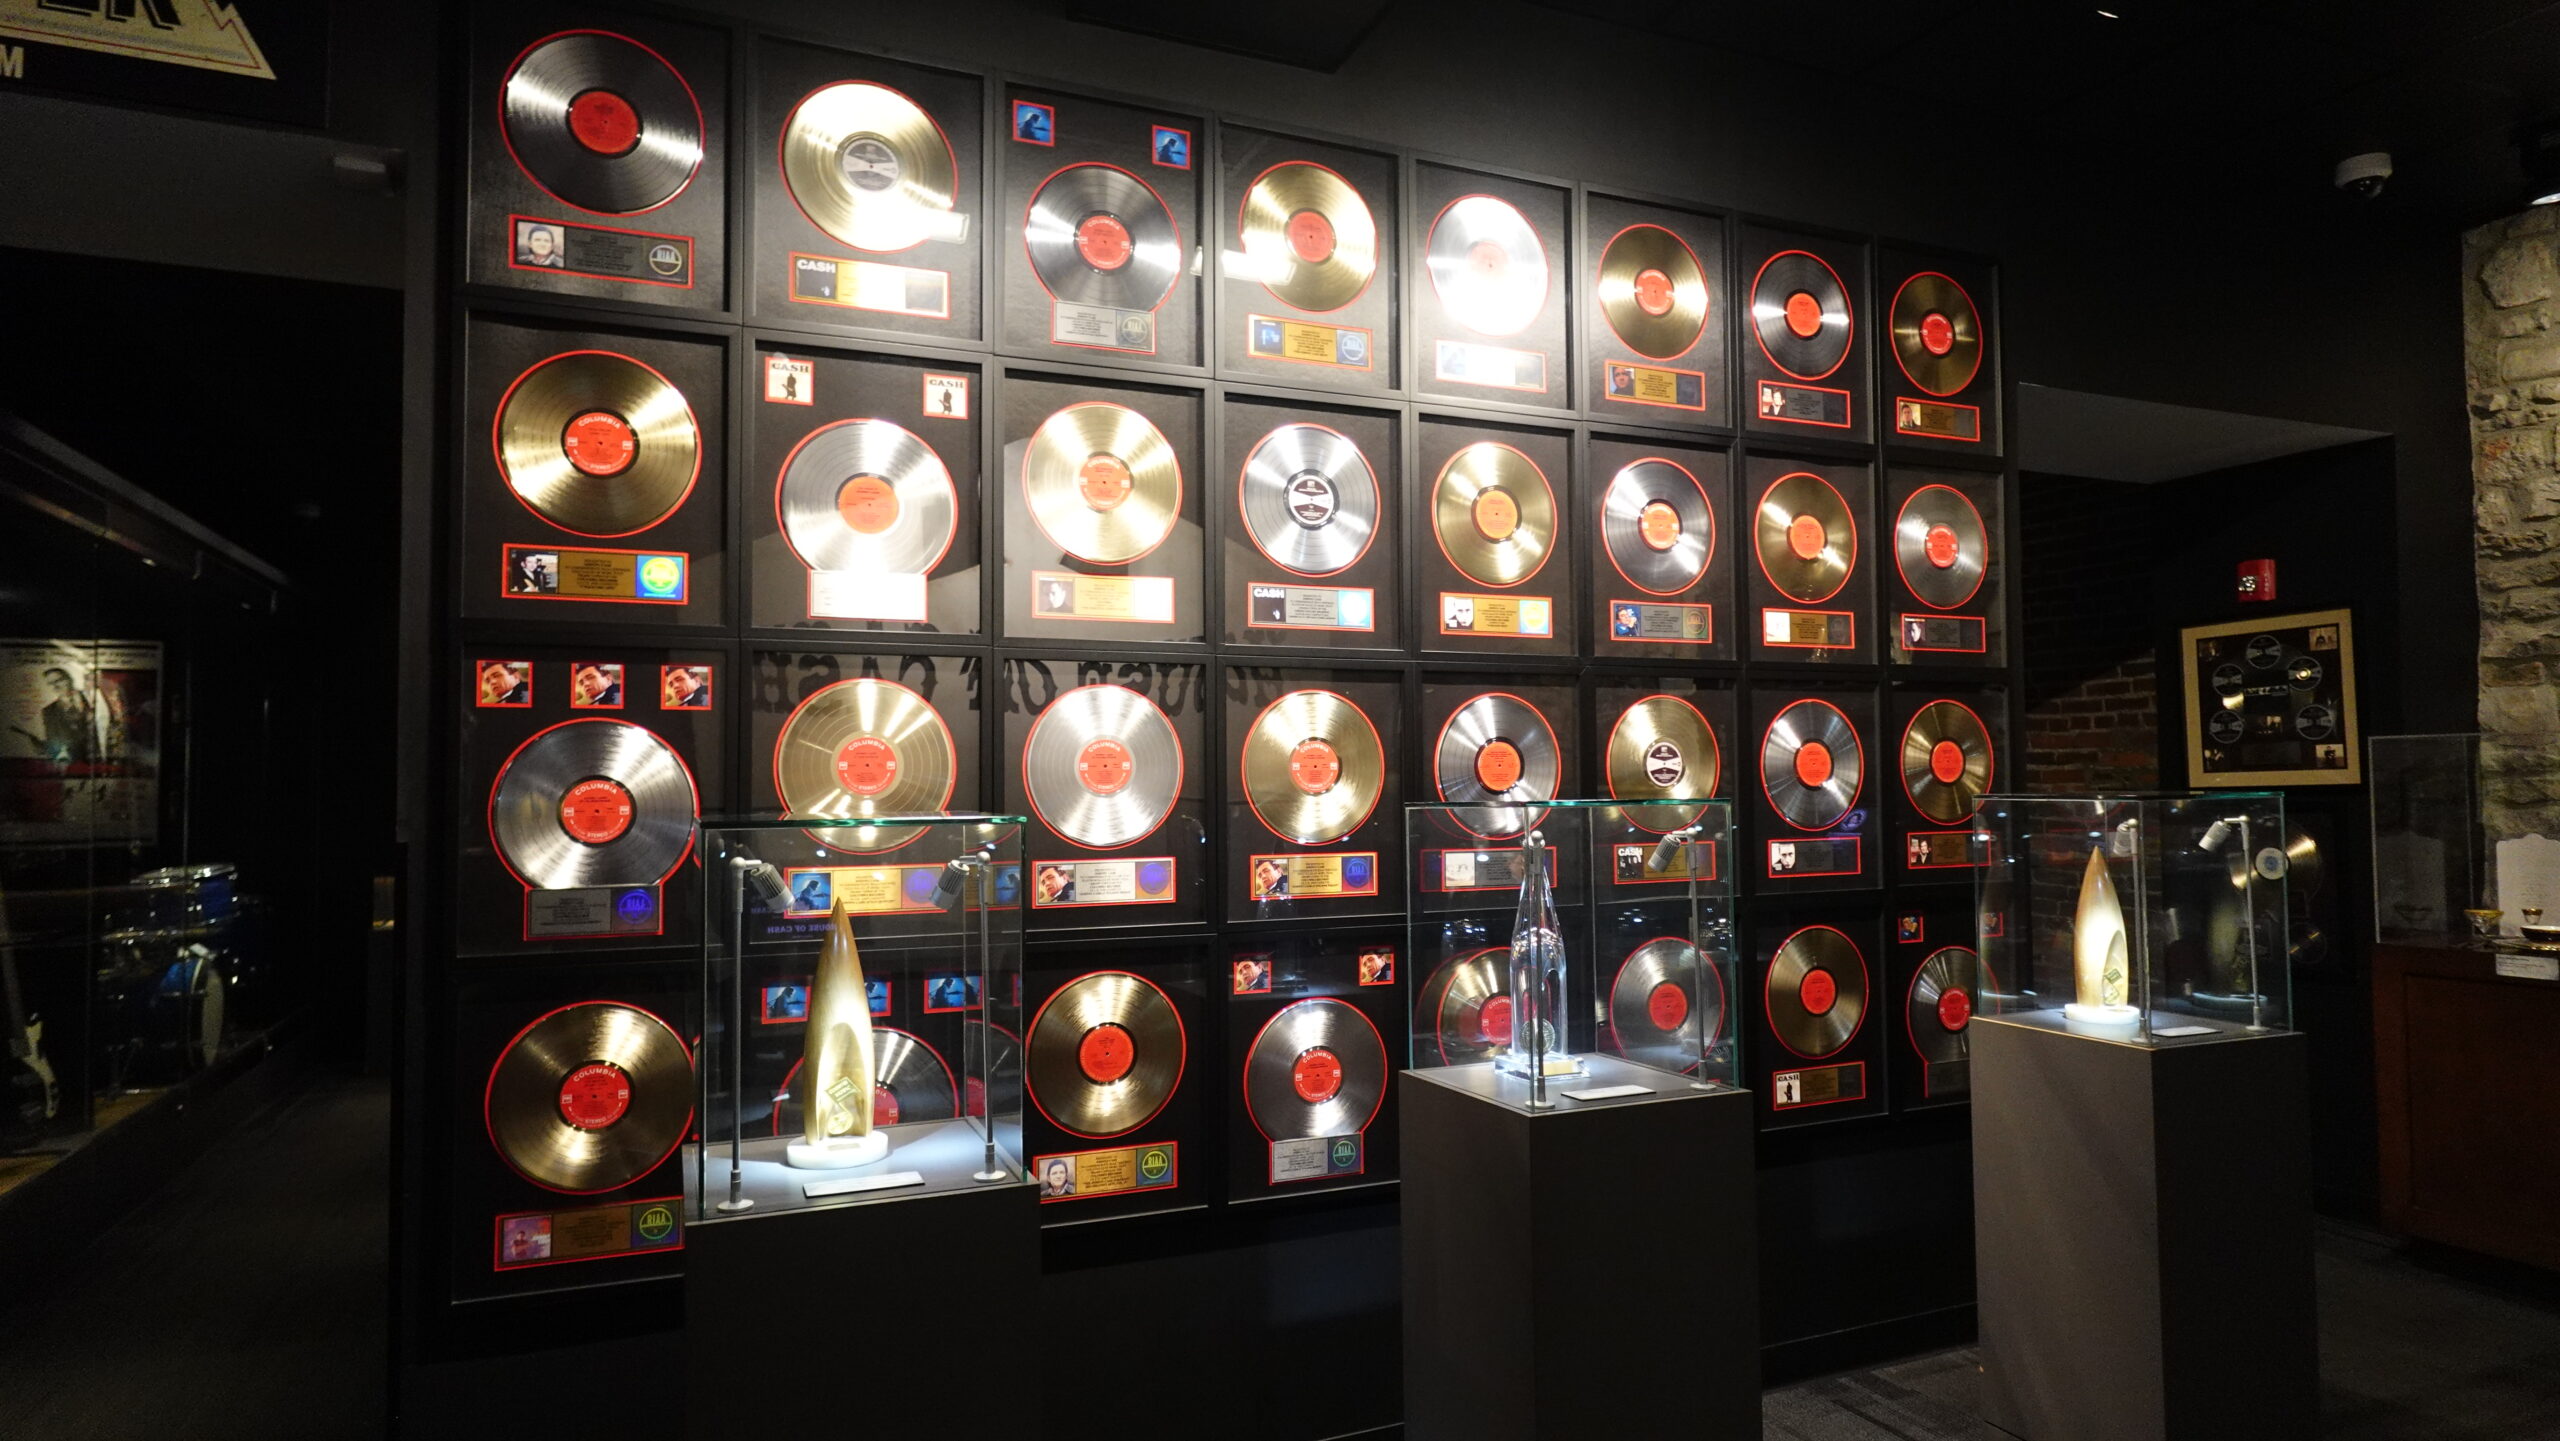 Johnny Cash museum in Nashville. Shows a wall of records